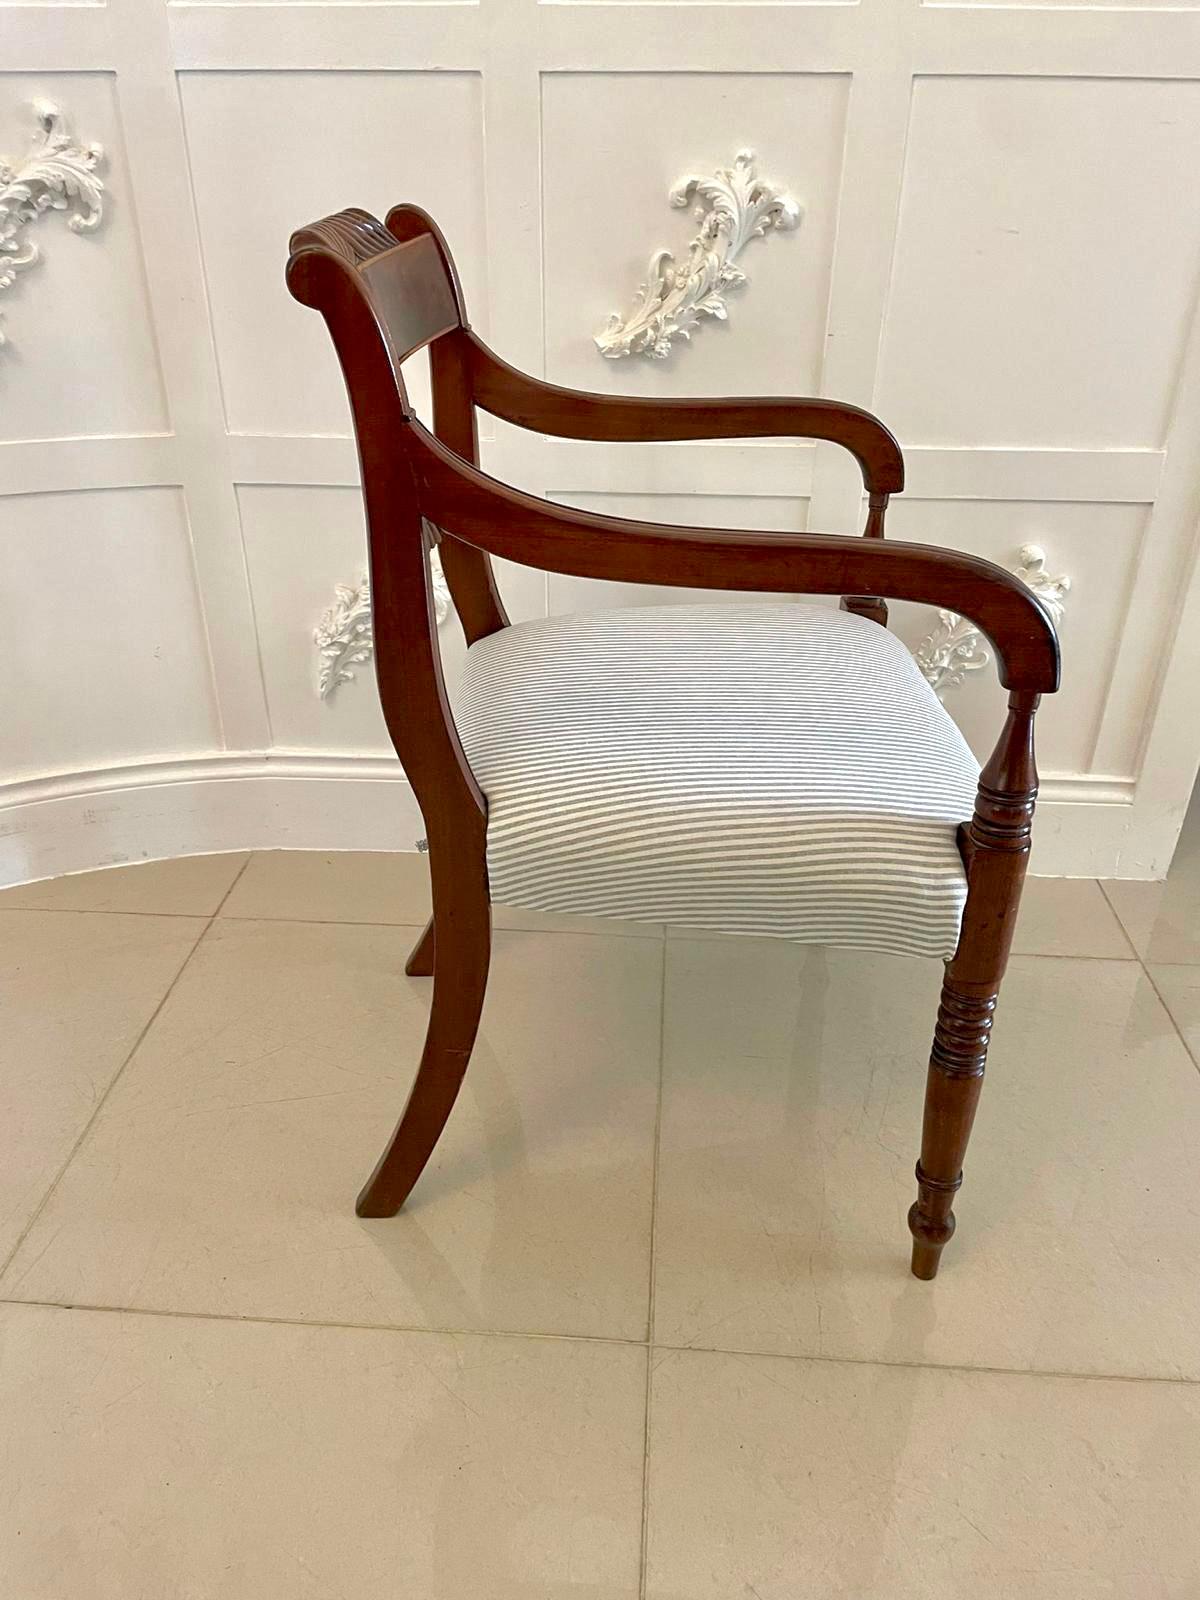 Antique Regency Quality Carved Mahogany Desk Chair In Good Condition For Sale In Suffolk, GB